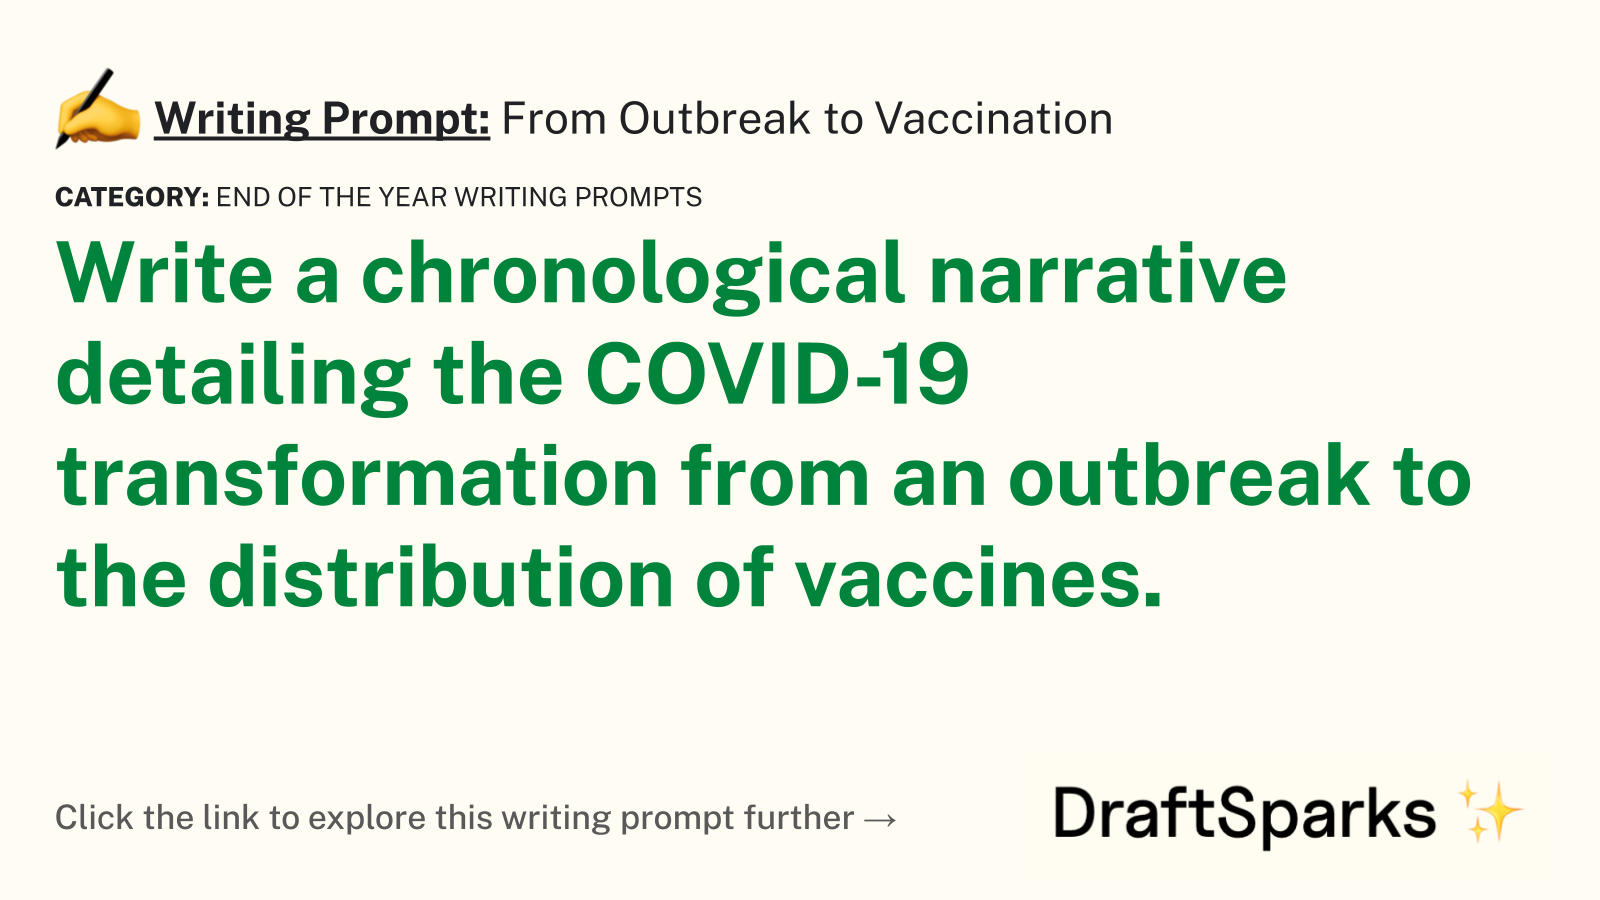 From Outbreak to Vaccination